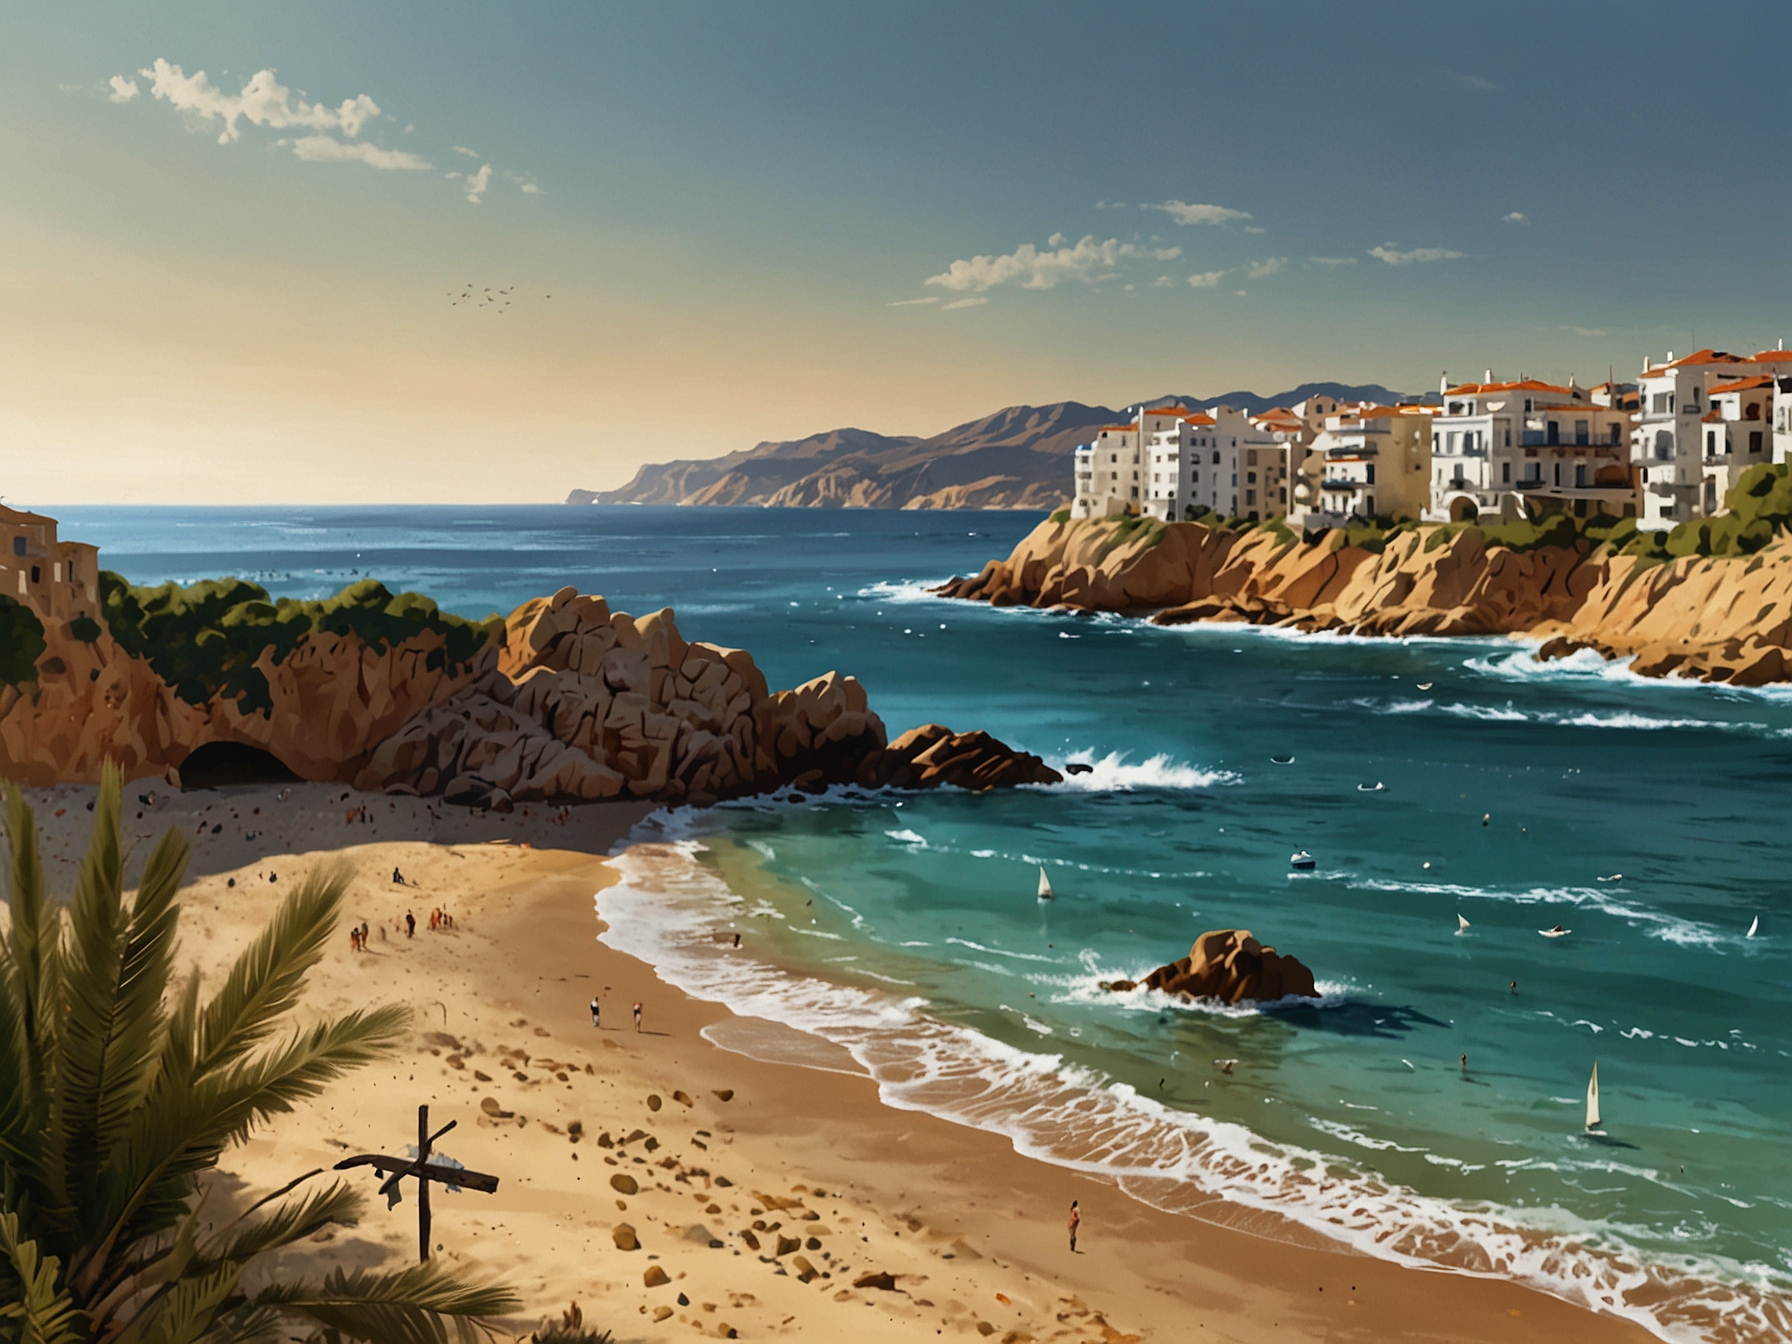 A picturesque beach in Spain with fewer tourists, representing the potential decline in British visitors due to the new EU entry requirements starting in October.